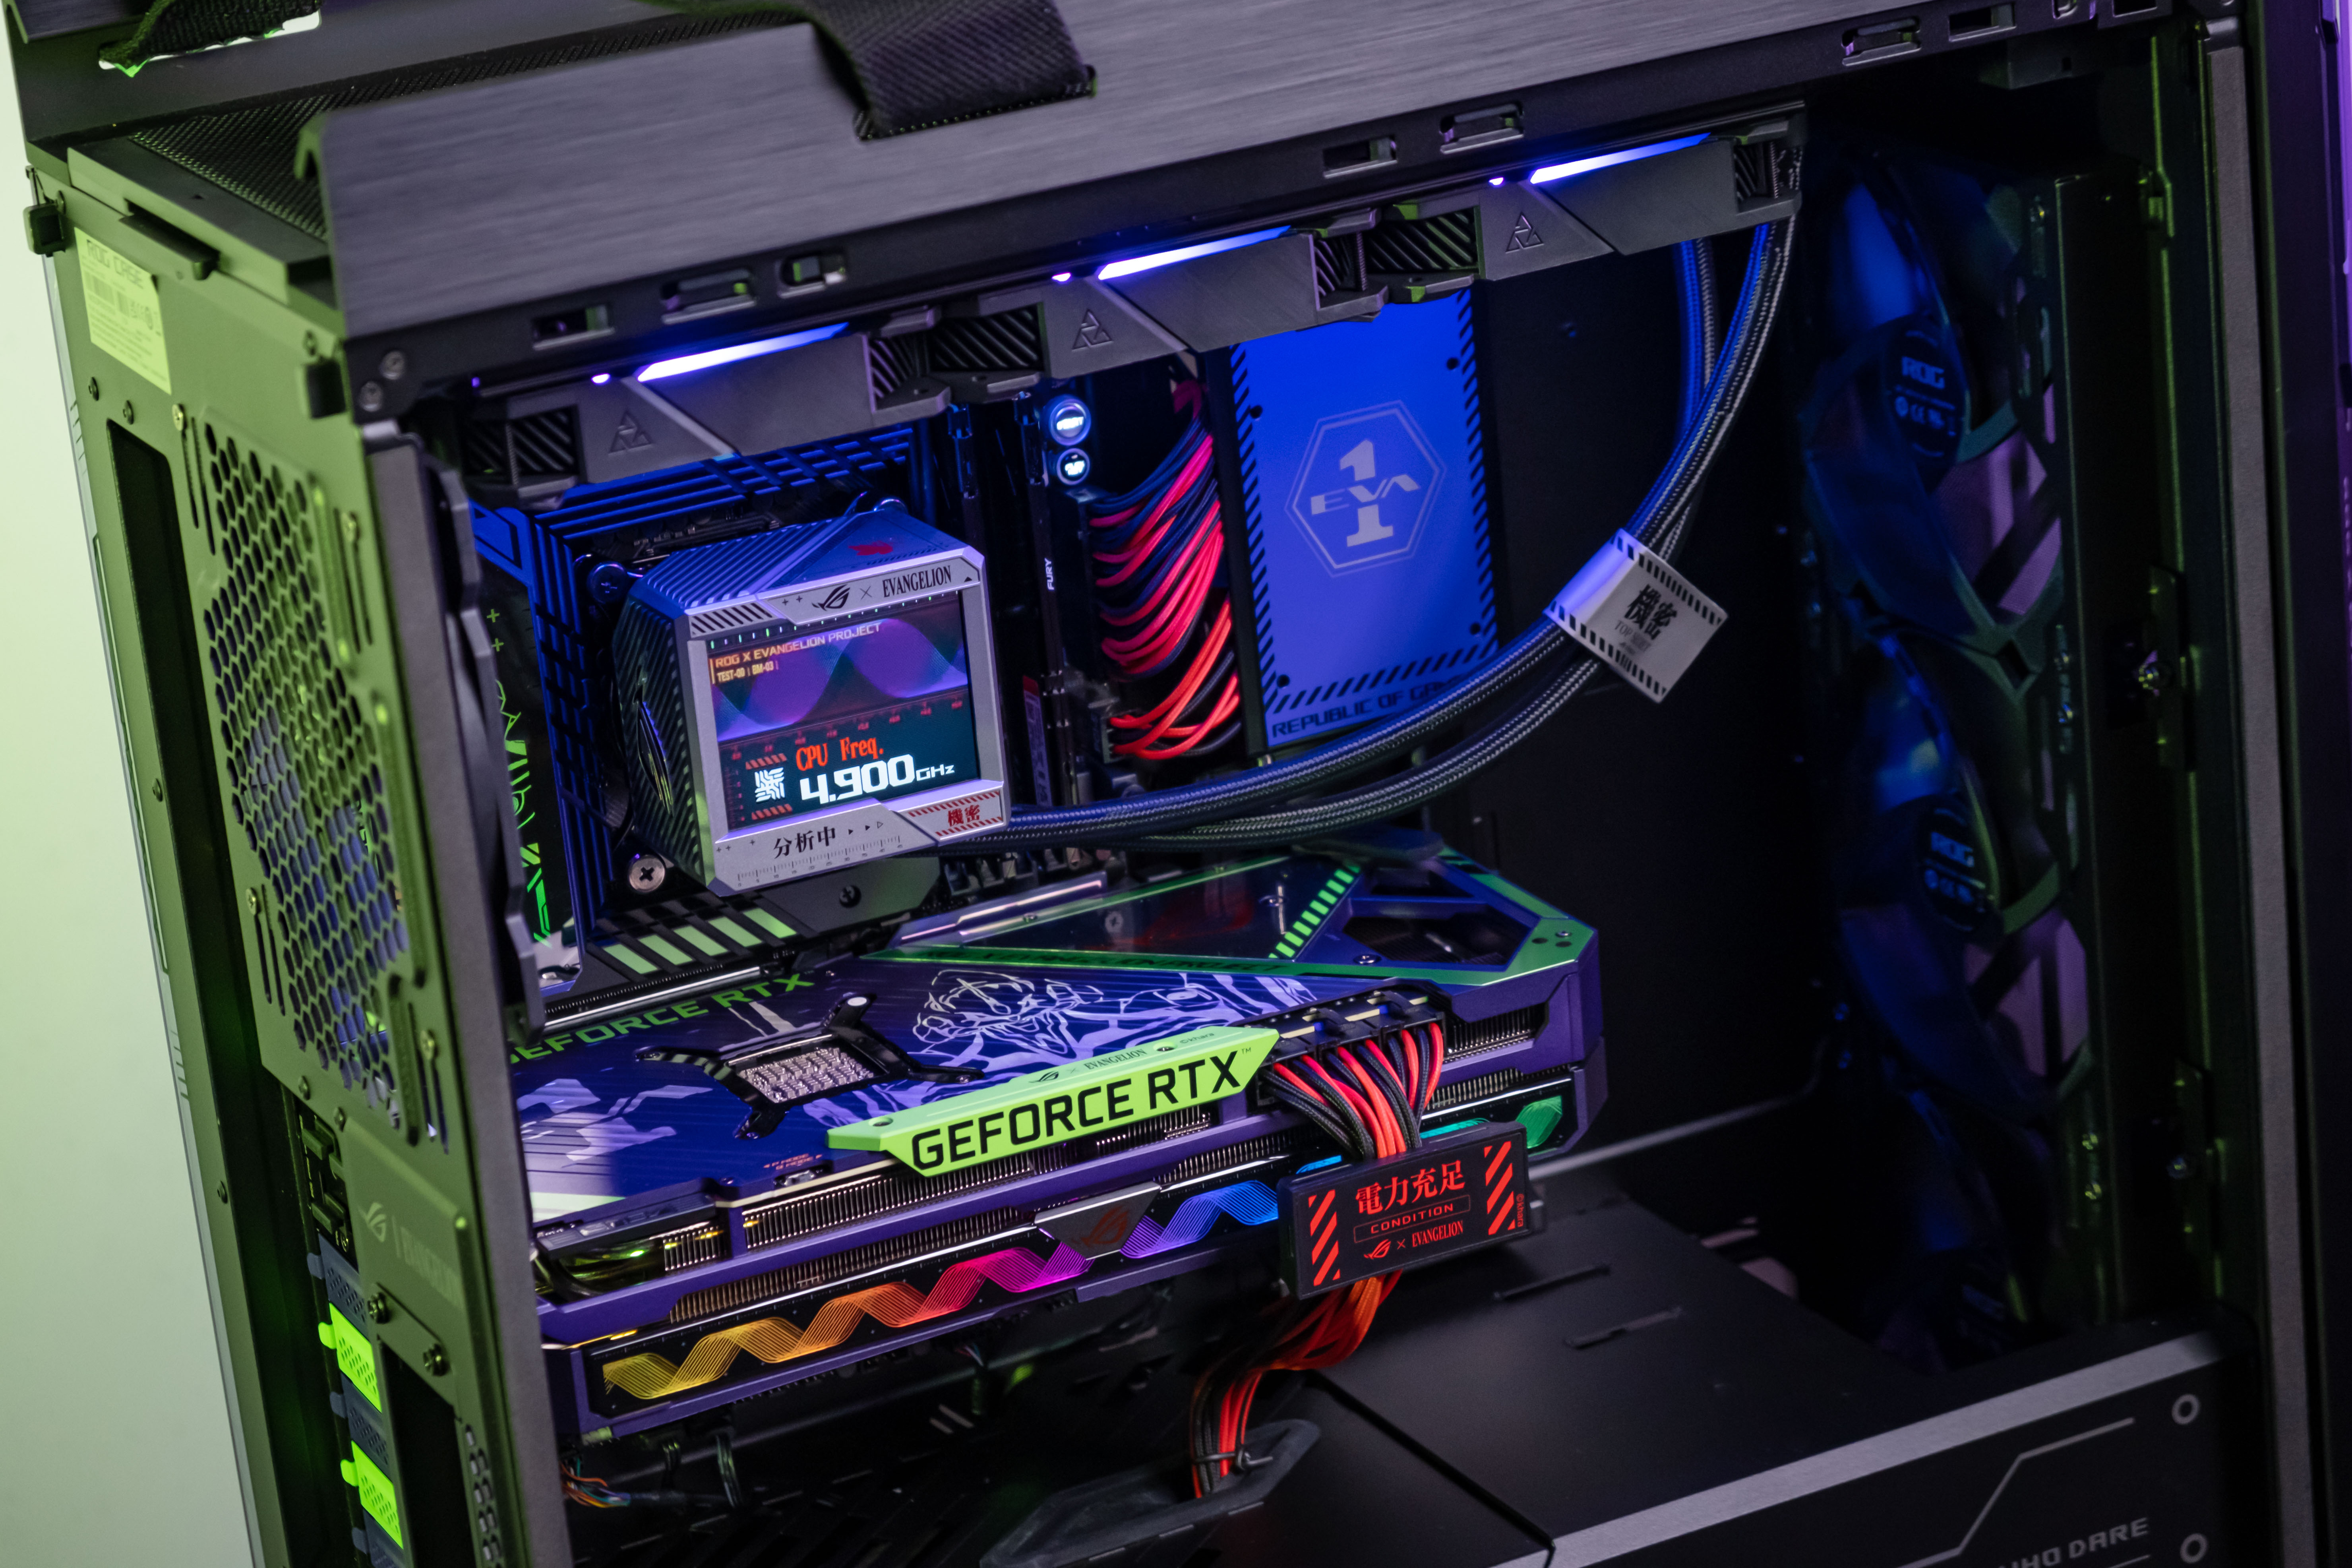 Republic Of Gamers ASUS PC Build PC Cases Evangelion Unit 01 Water Cooling Crossover GPU 5919x3946